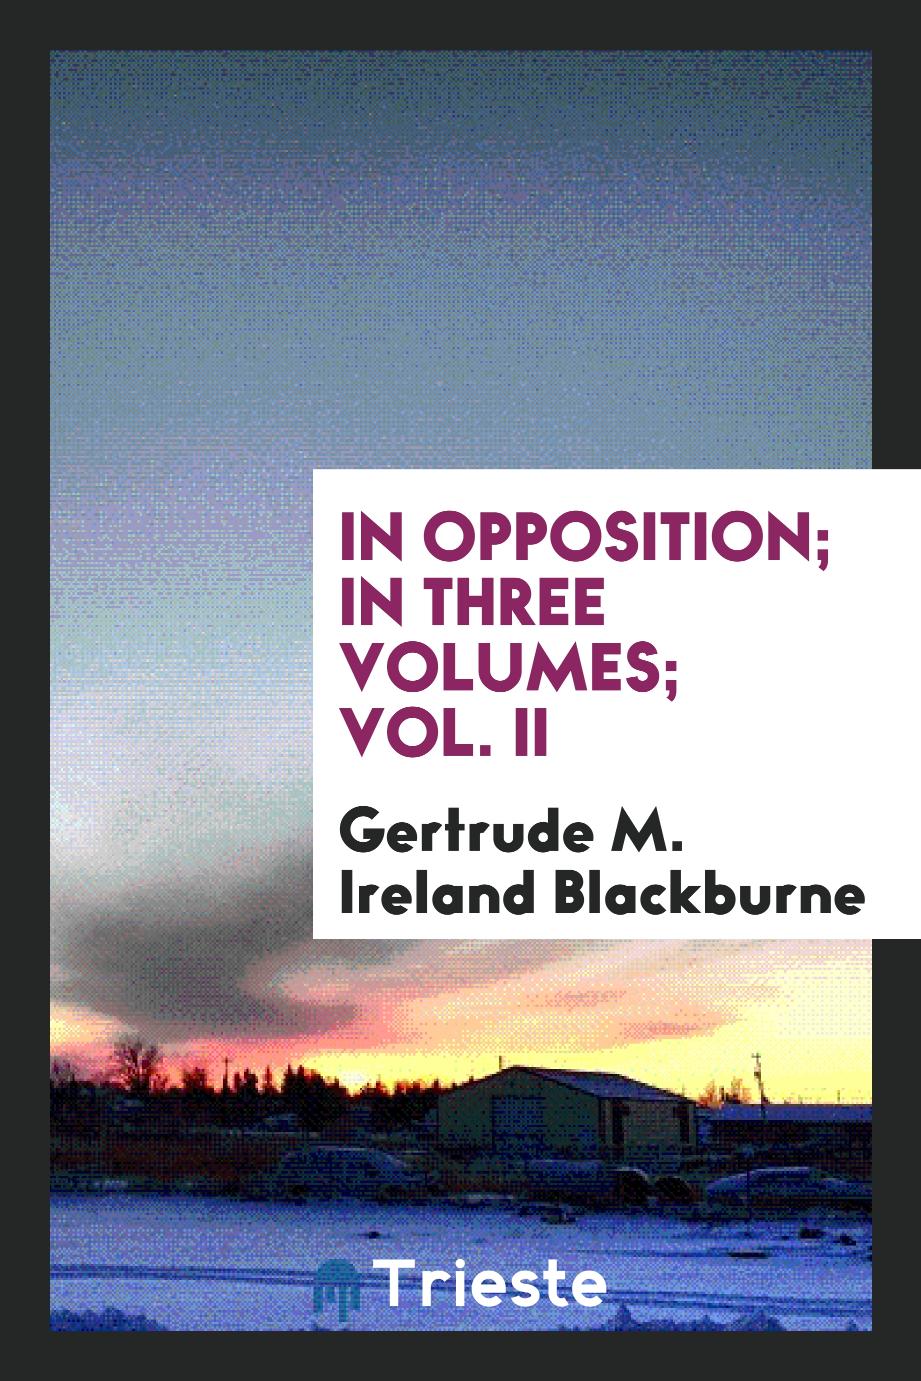 In opposition; in three volumes; Vol. II